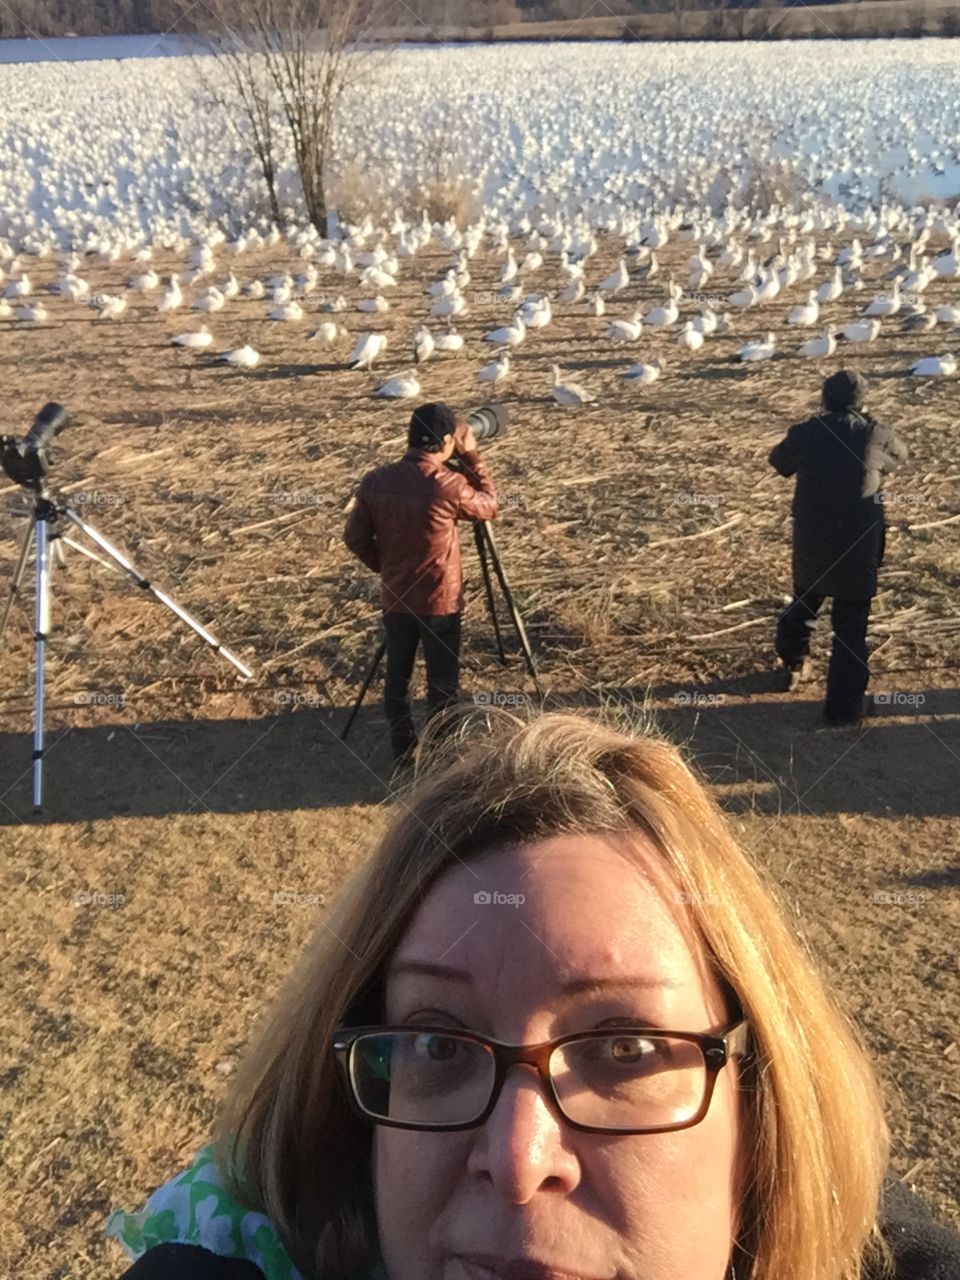 So Many Snow Geese literally thousands so awesome to witness 